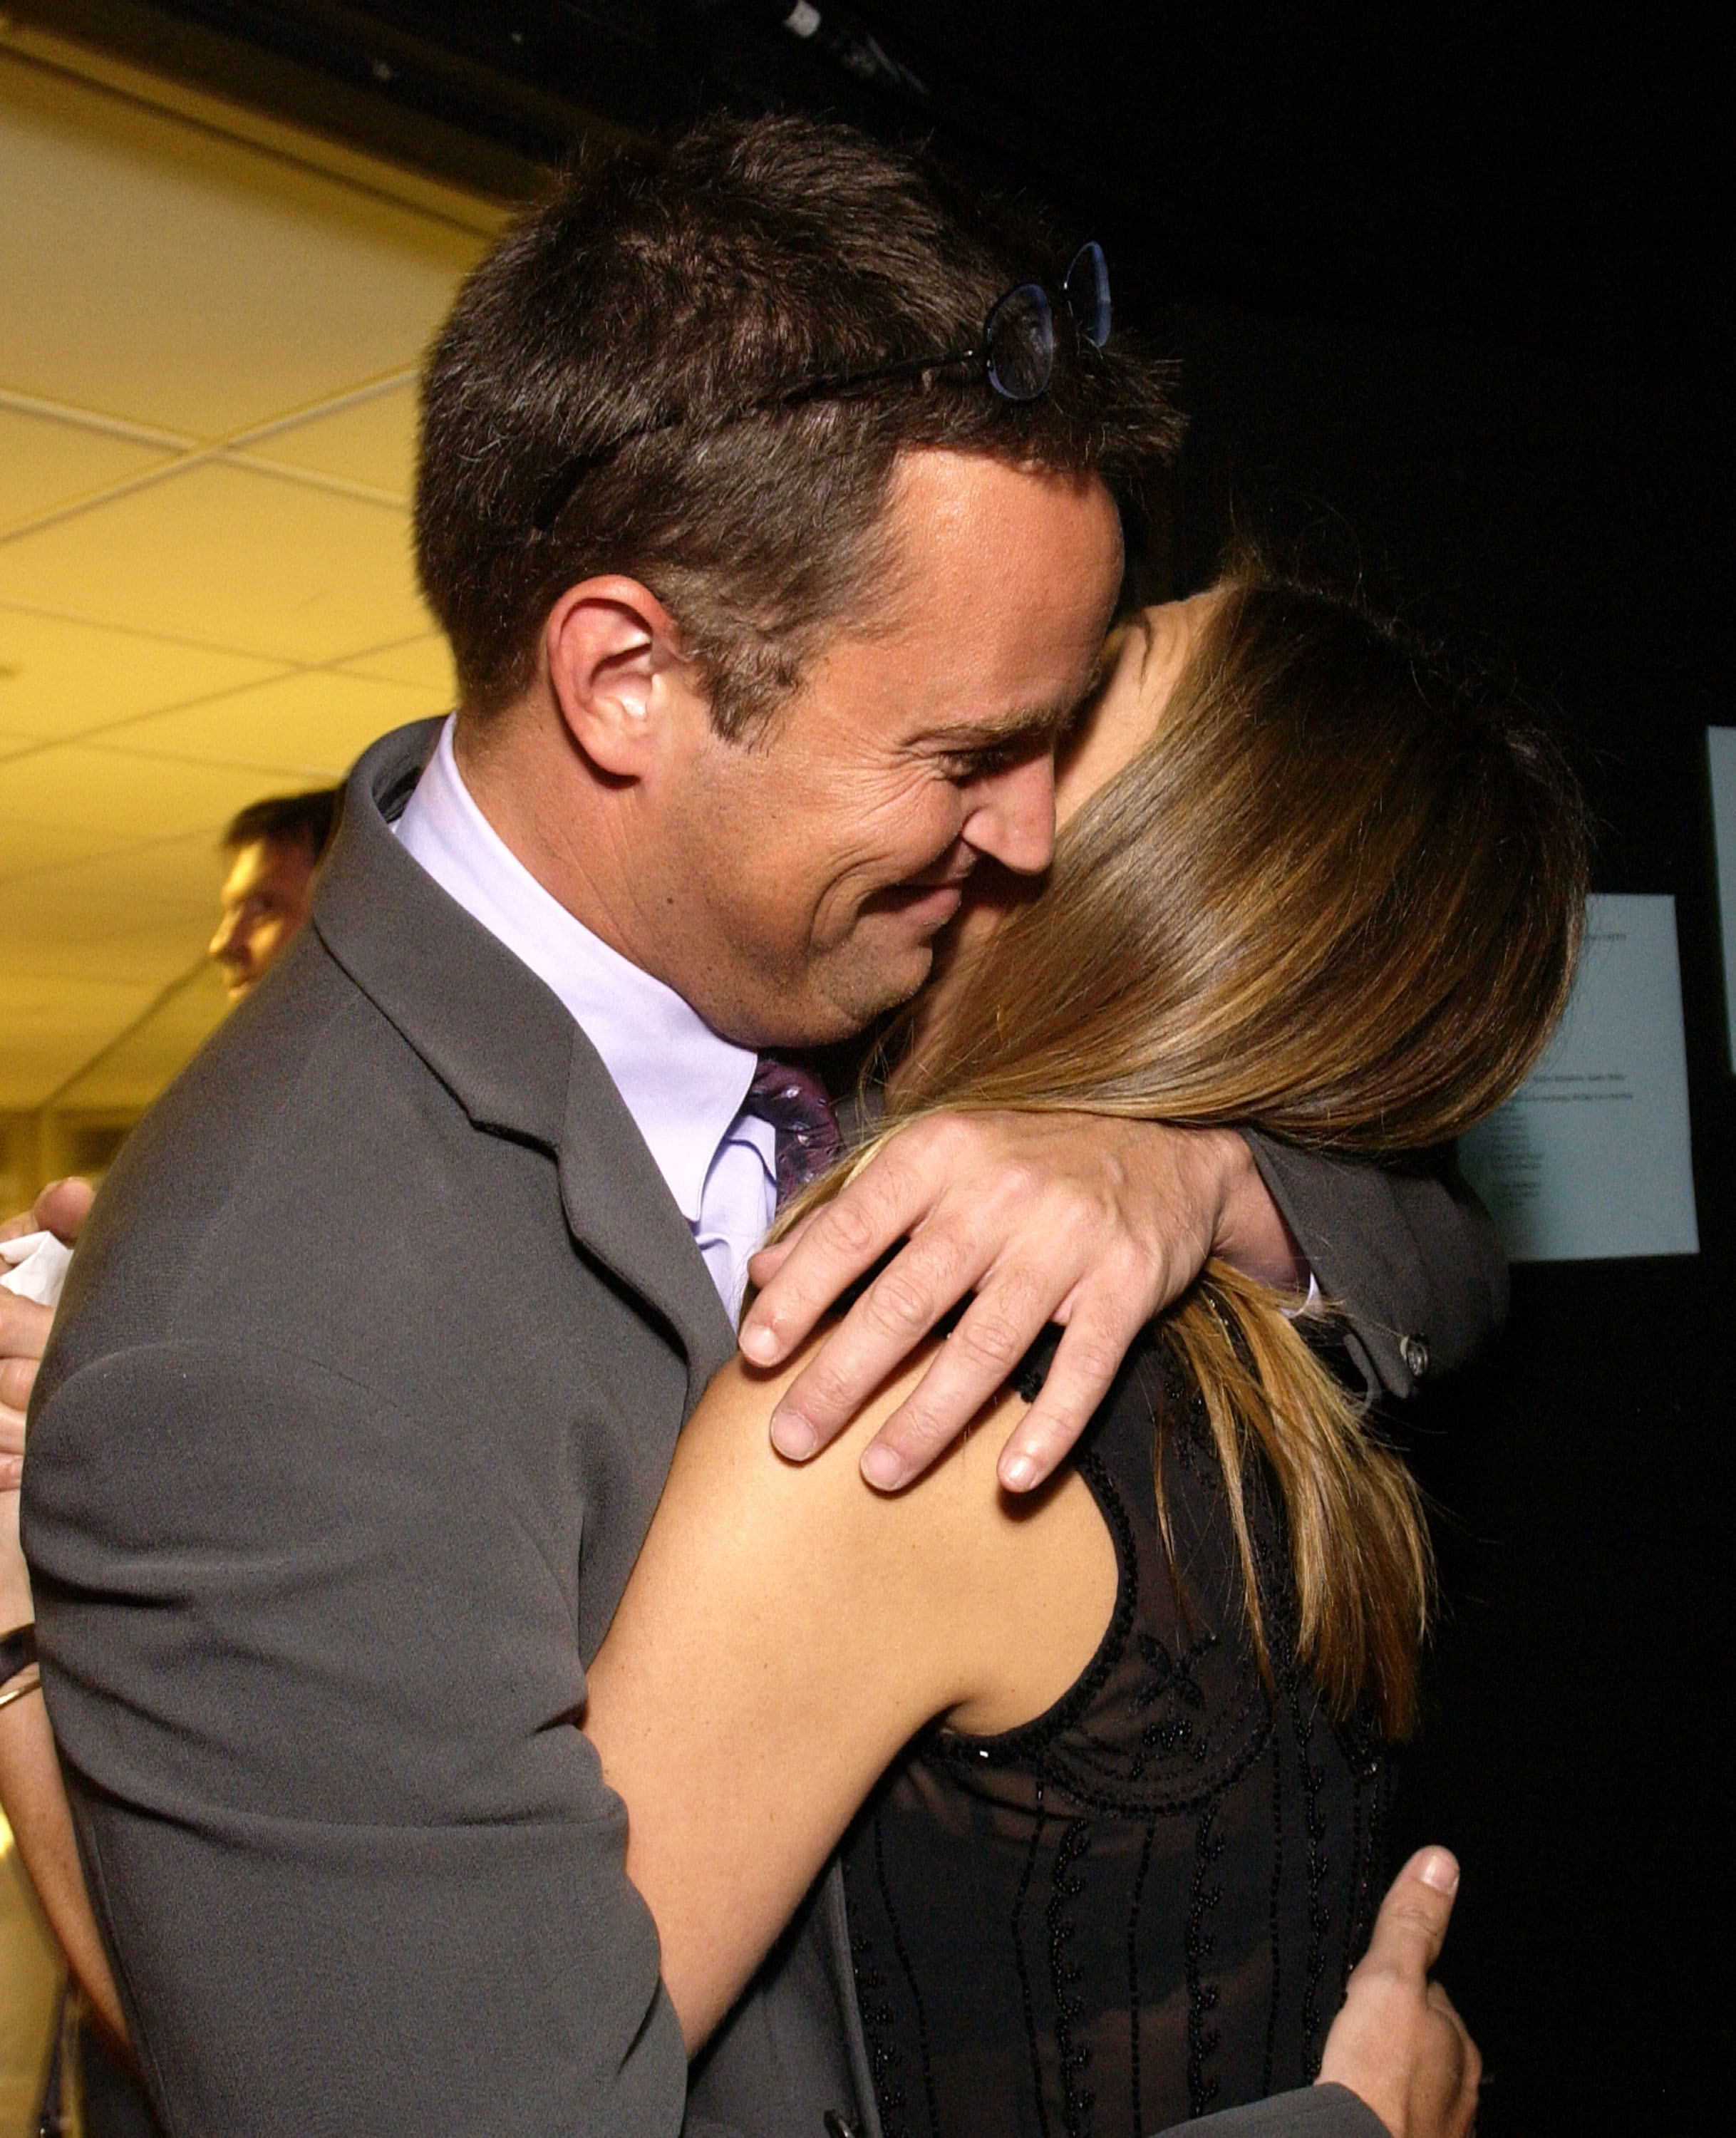 Matthew Perry and Jennifer Aniston during the 5th Annual "Helping Kids Fly Higher" benefit event | Source: Getty Images